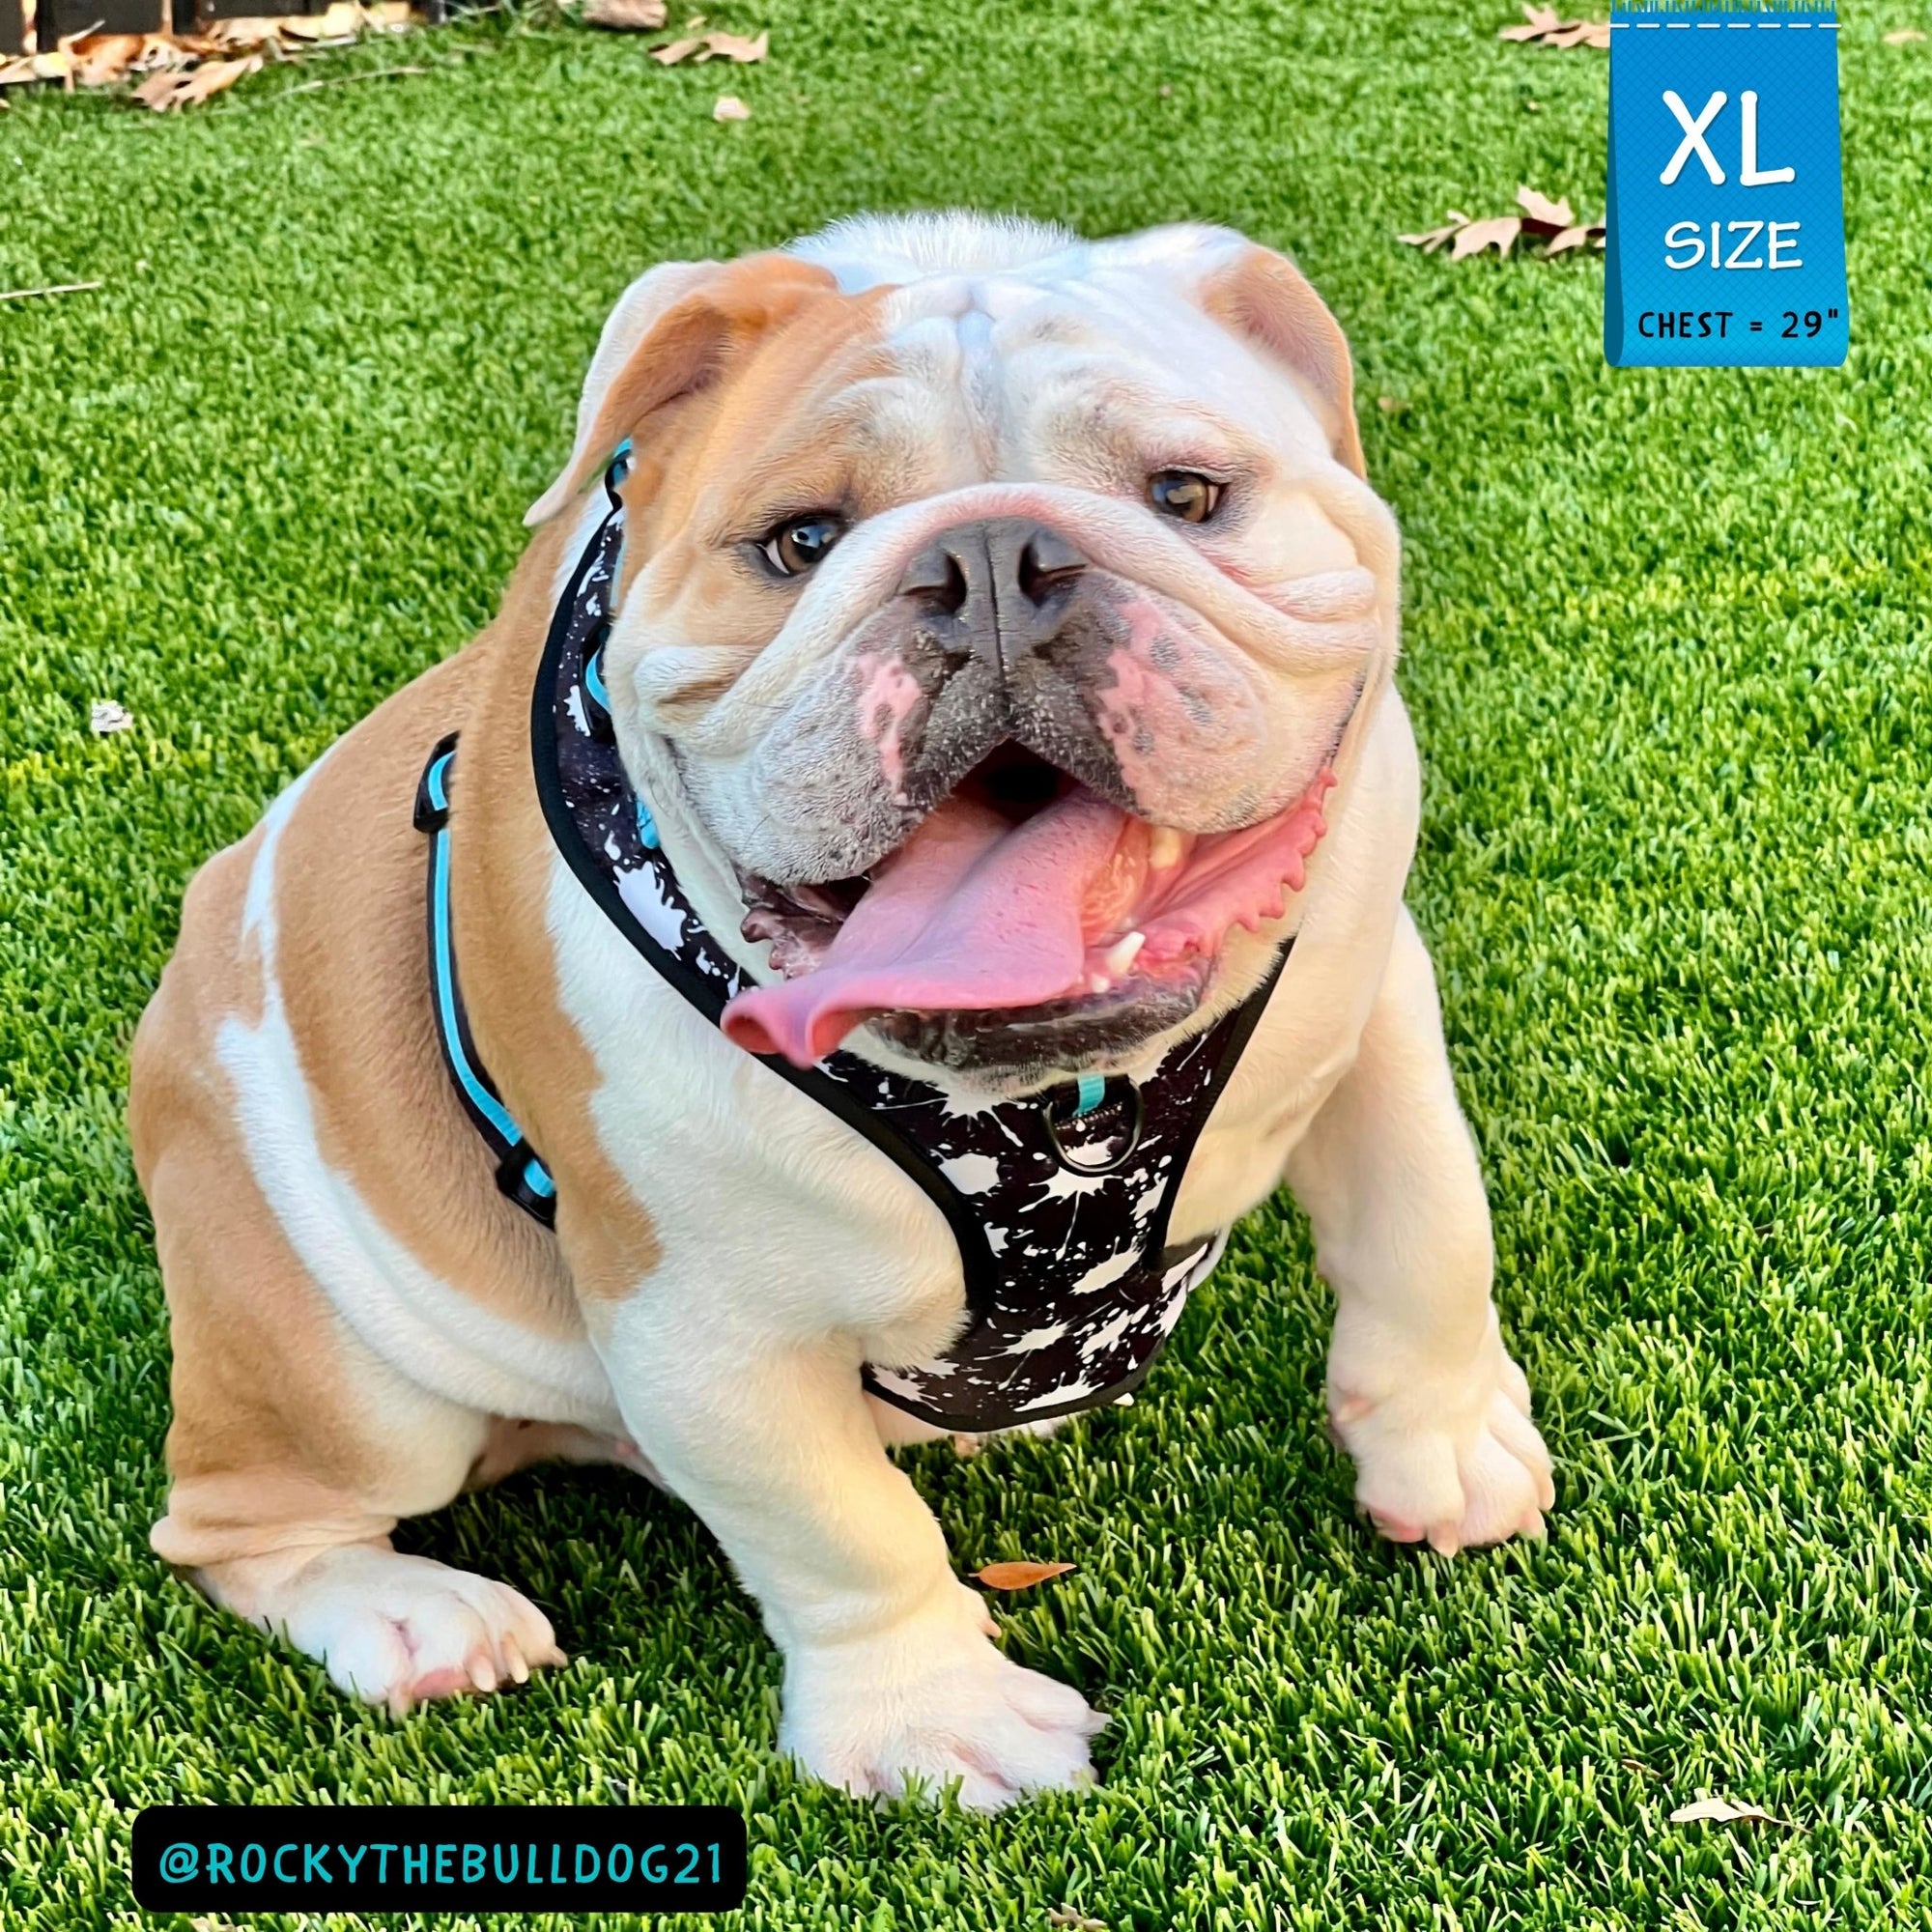 No Pull Dog Harness - English Bulldog wearing black adjustable harness with white paint splatter and teal accents - front clip for no pull training - sitting outdoors in the grass posing - Wag Trendz